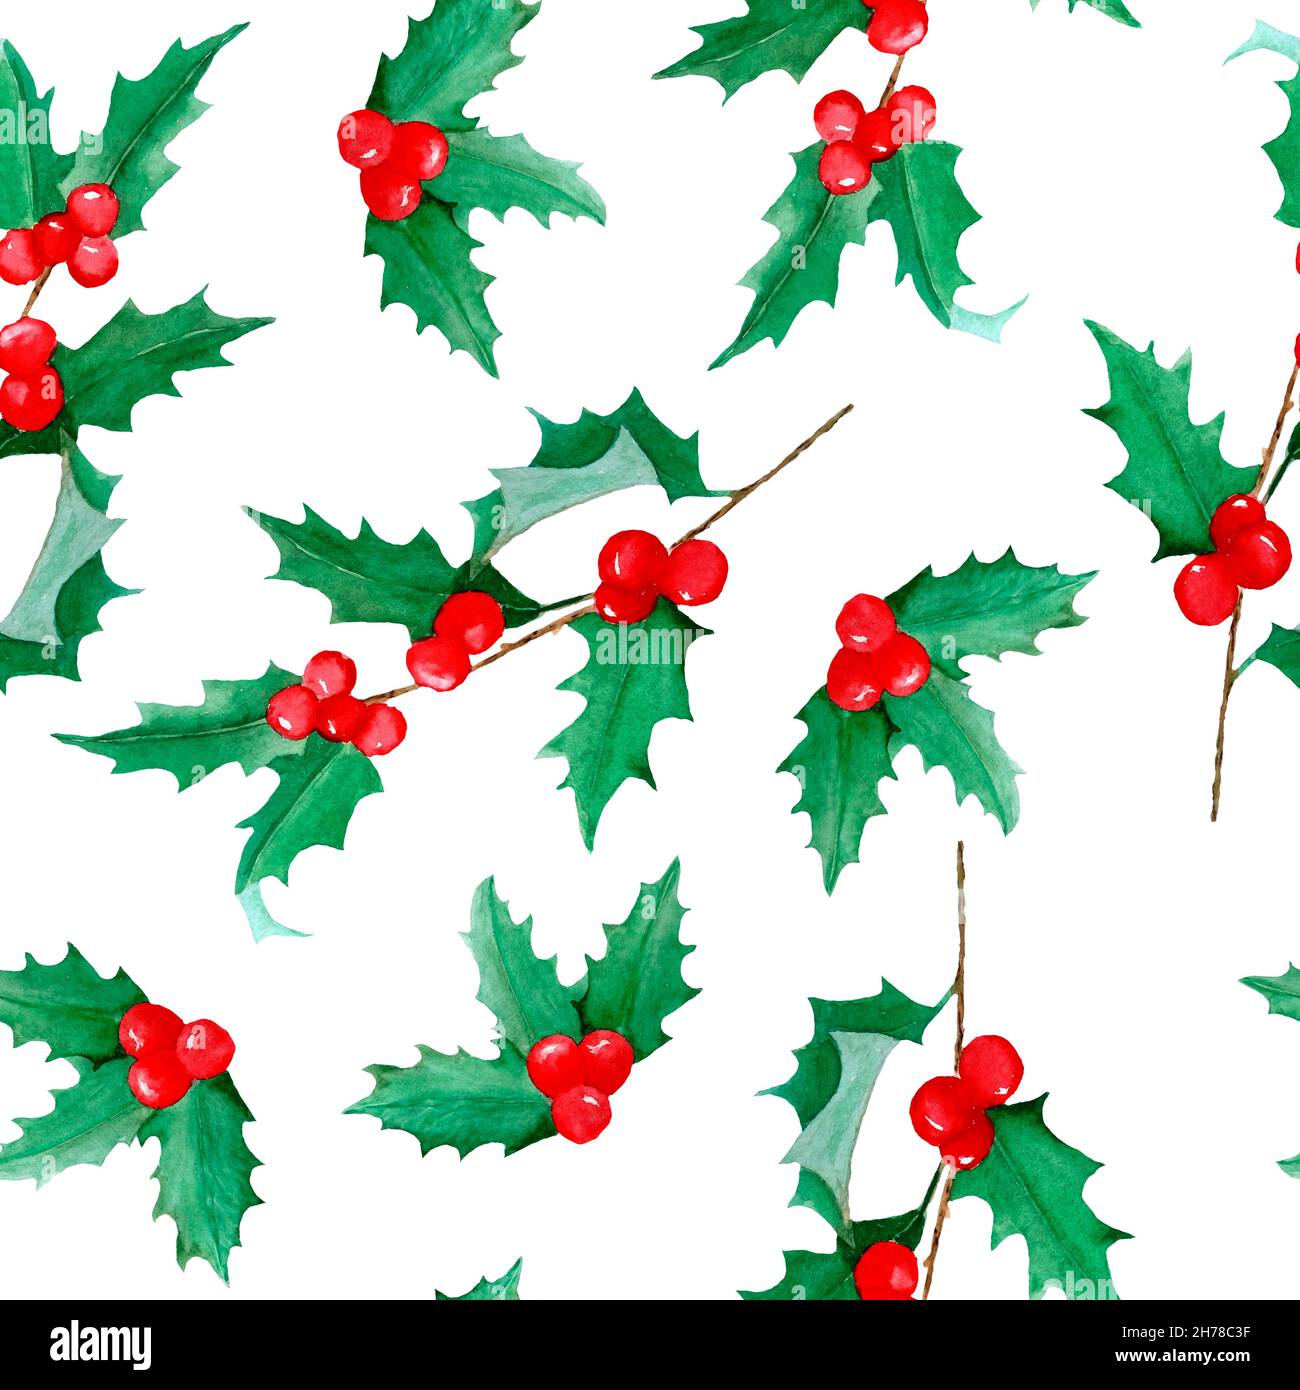 Watercolor seamless hand drawn pattern with Christmas plants holly pine spruce conifer branches holly red berries. Elegant winter candles on white background for wrapping paper textile new year celebration Stock Photo